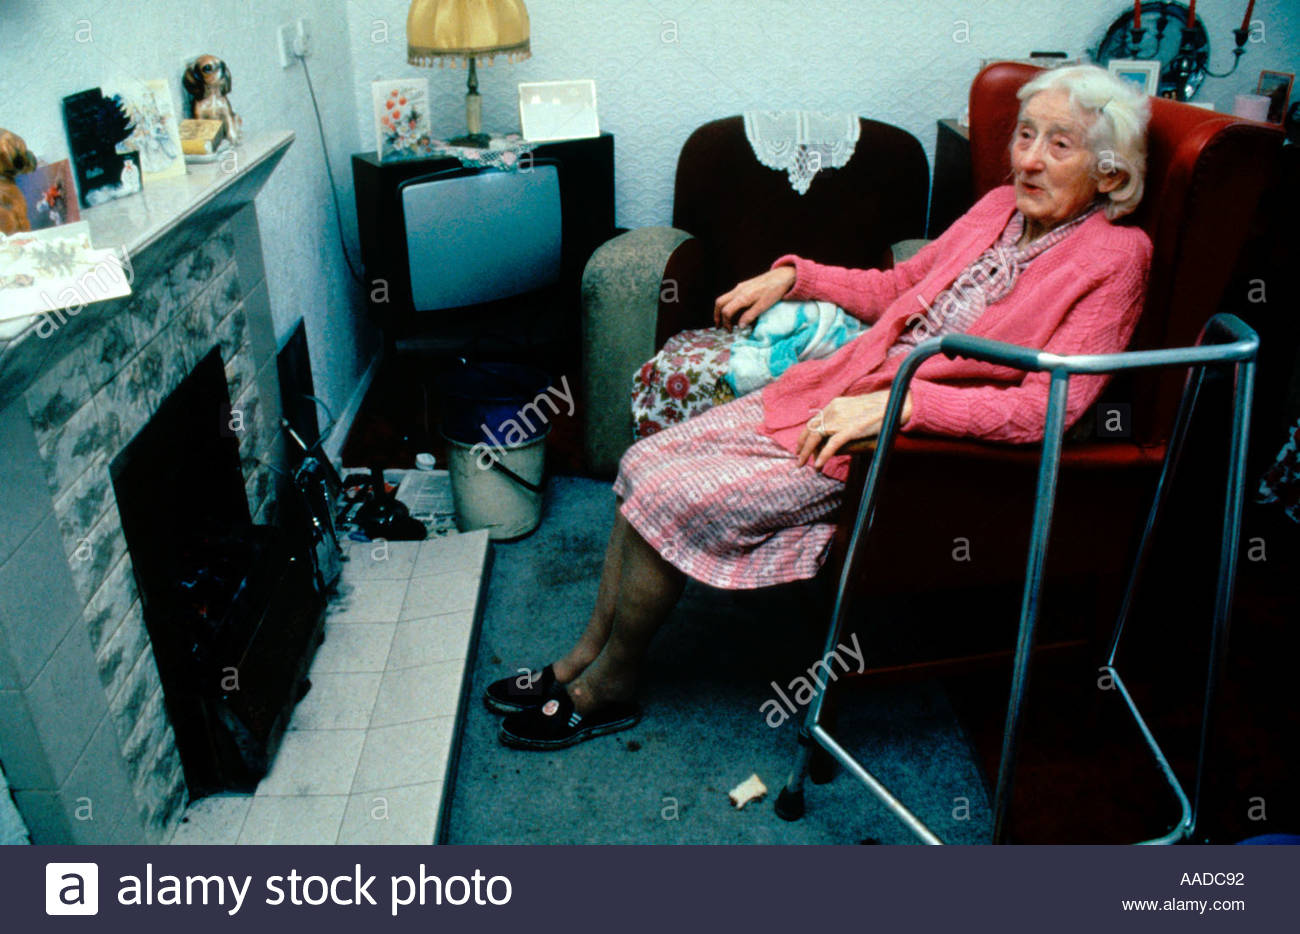 elderly-woman-looking-cold-sitting-in-fr